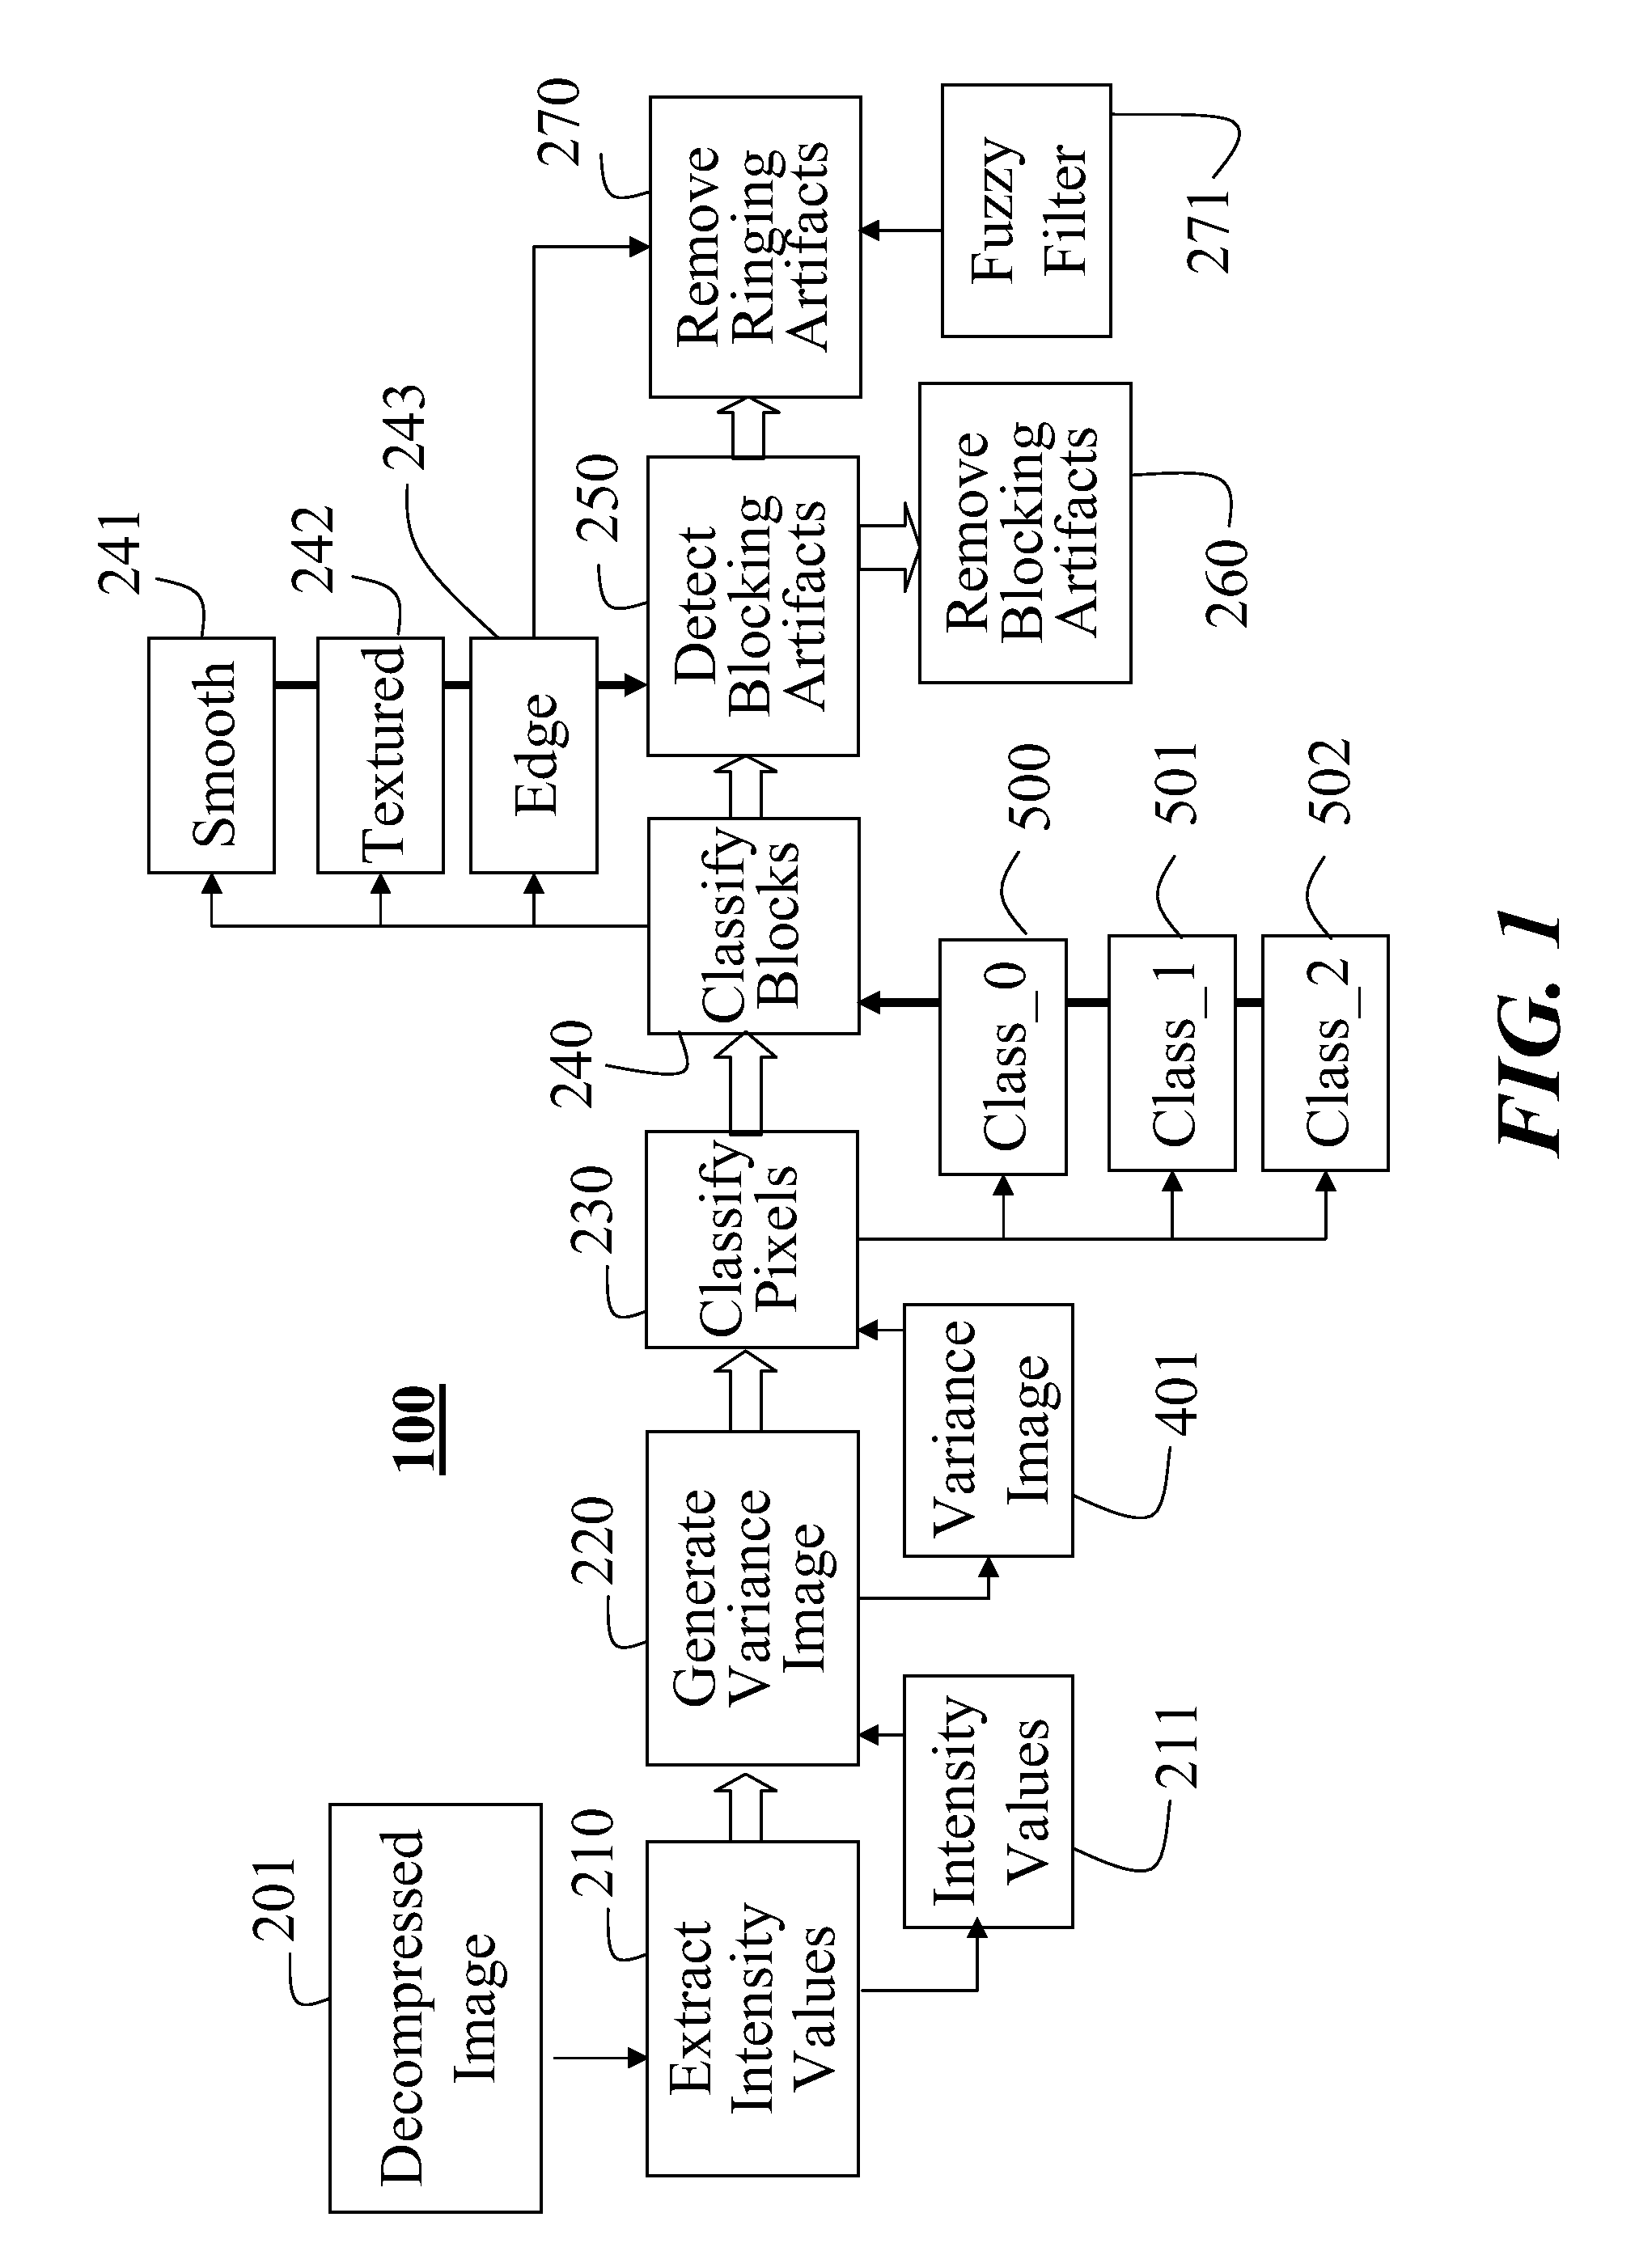 System and method for reducing ringing artifacts in images